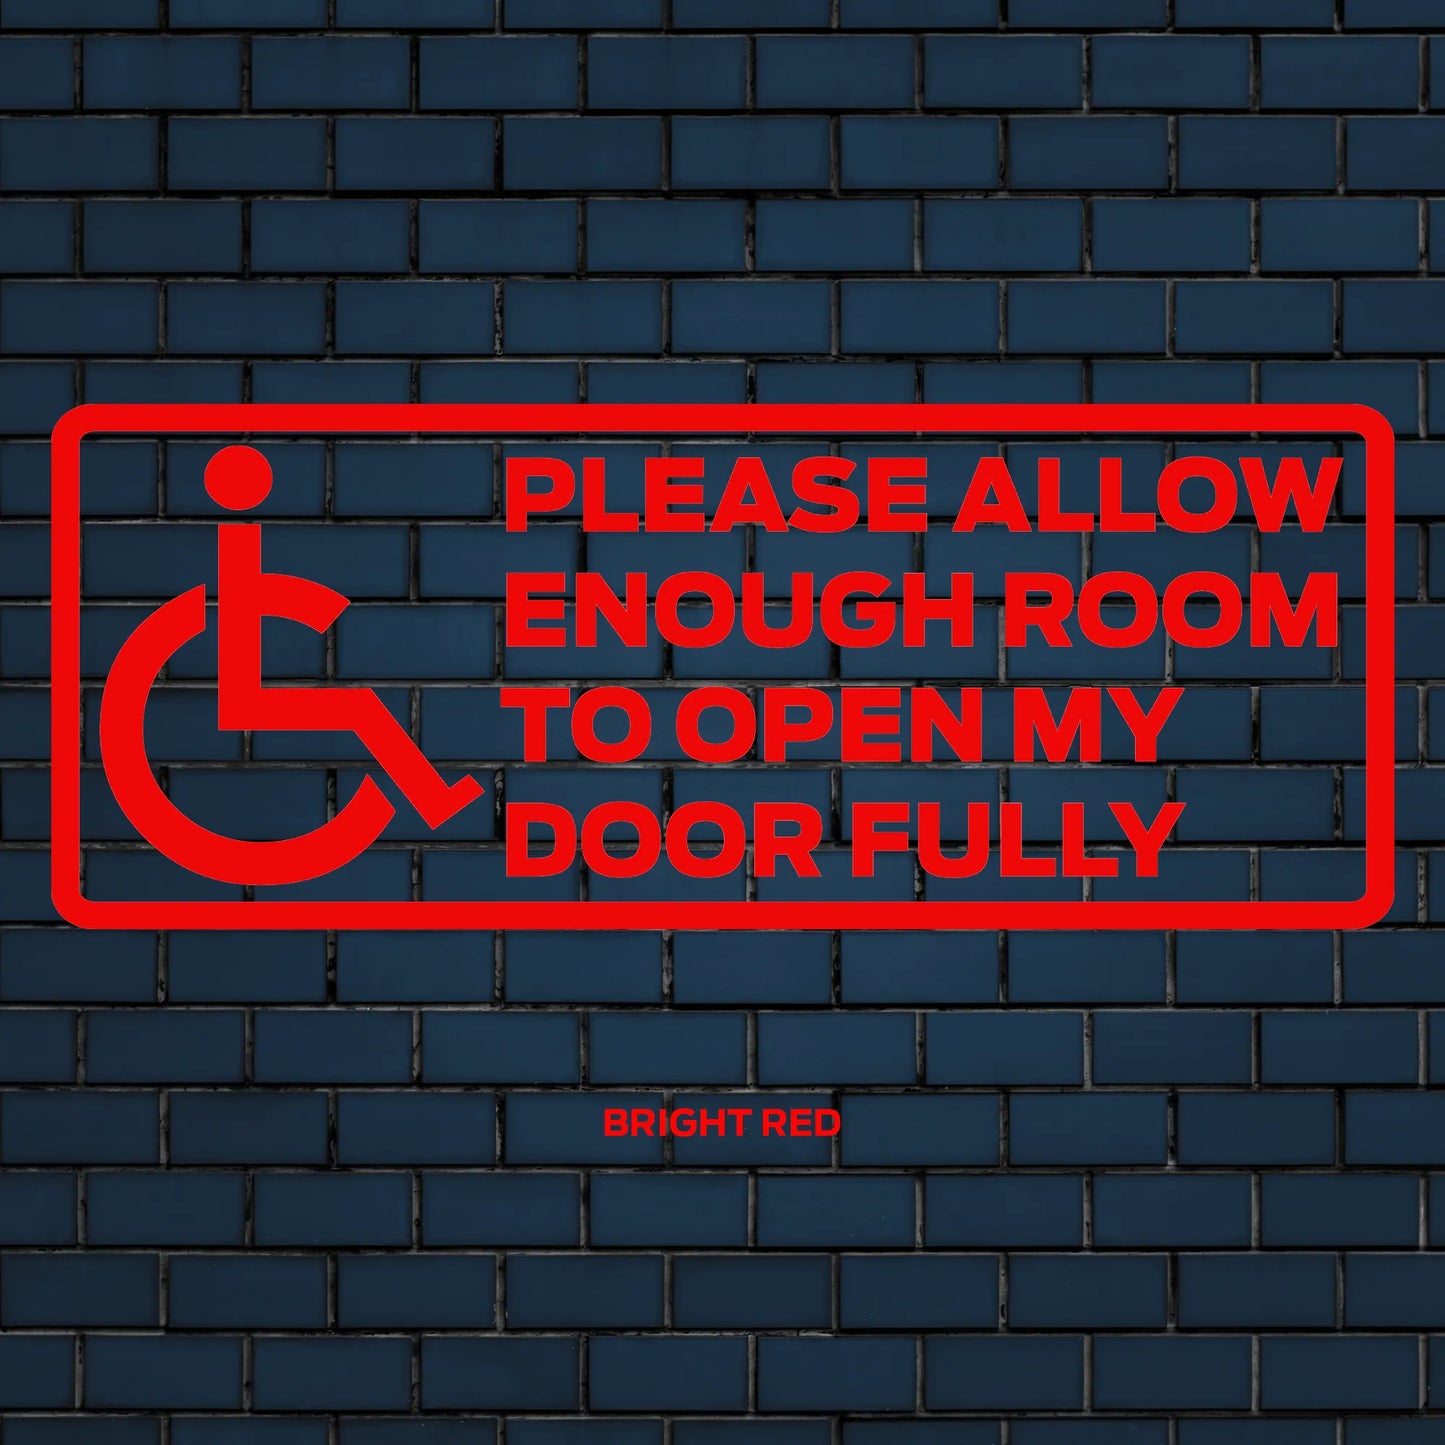 Please allow enough room to open my door fully - Disability Decal